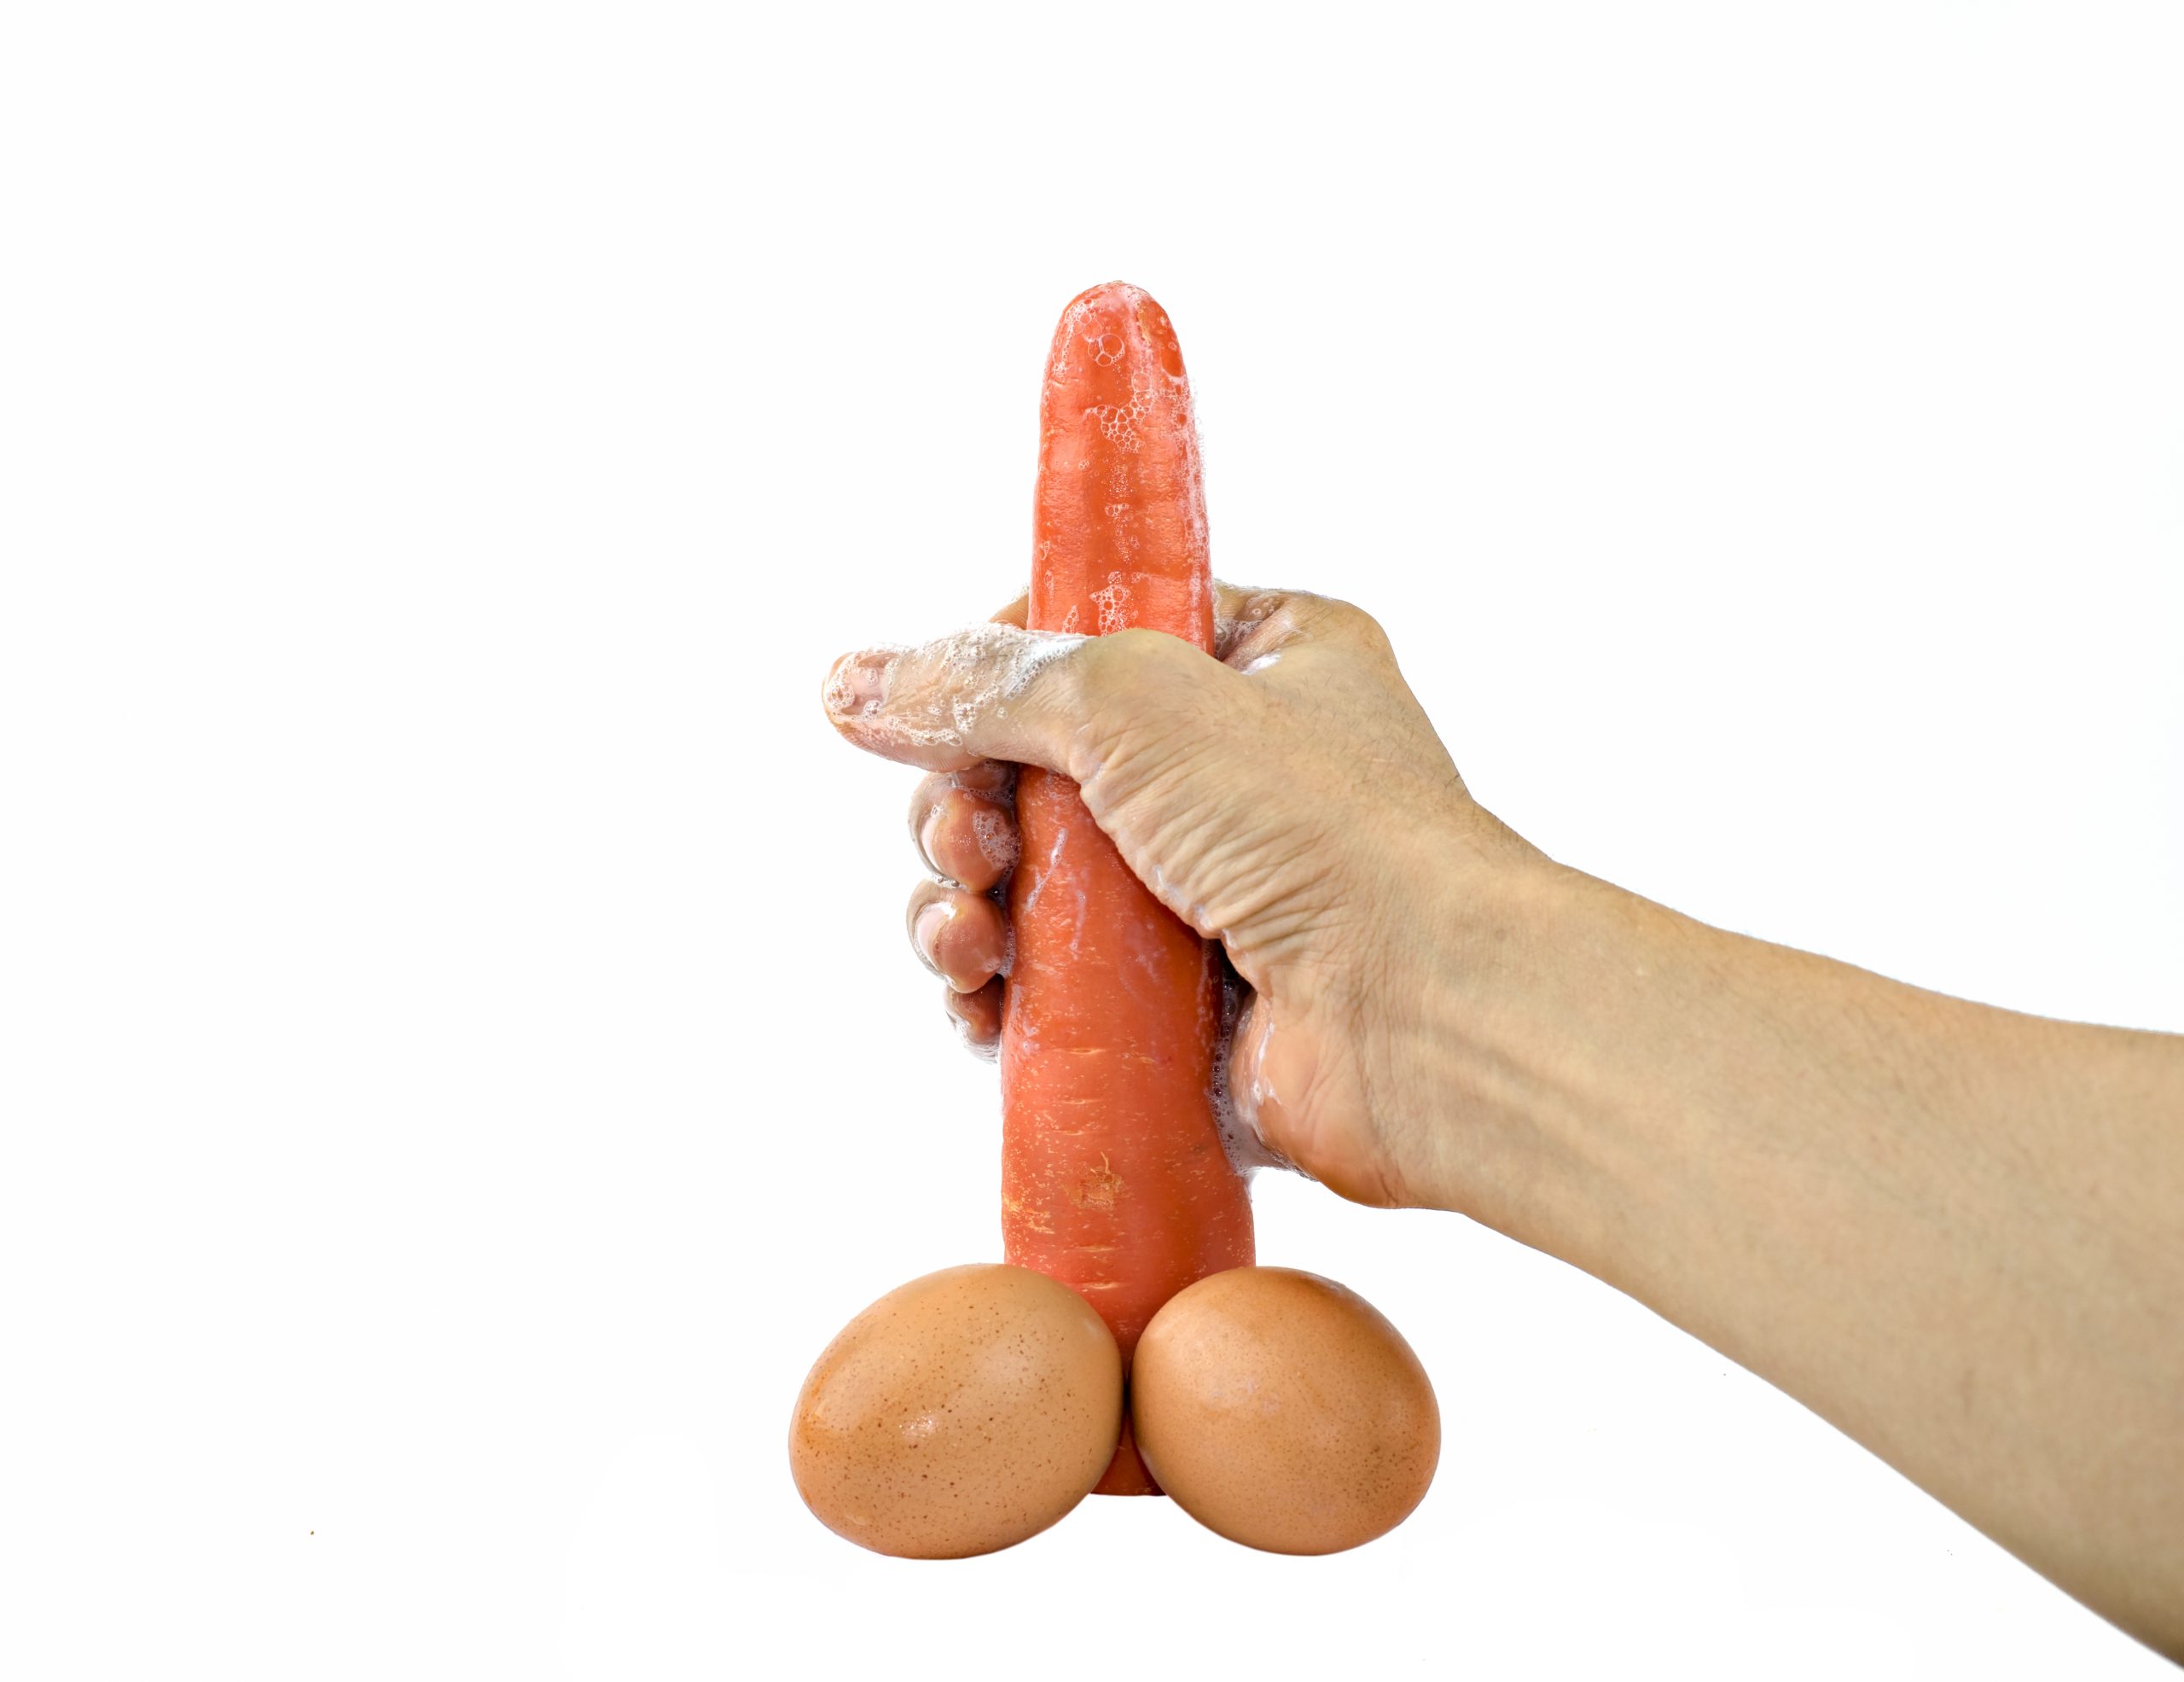 hand holding carrots and two eggs forming the shape of penis and balls respectively